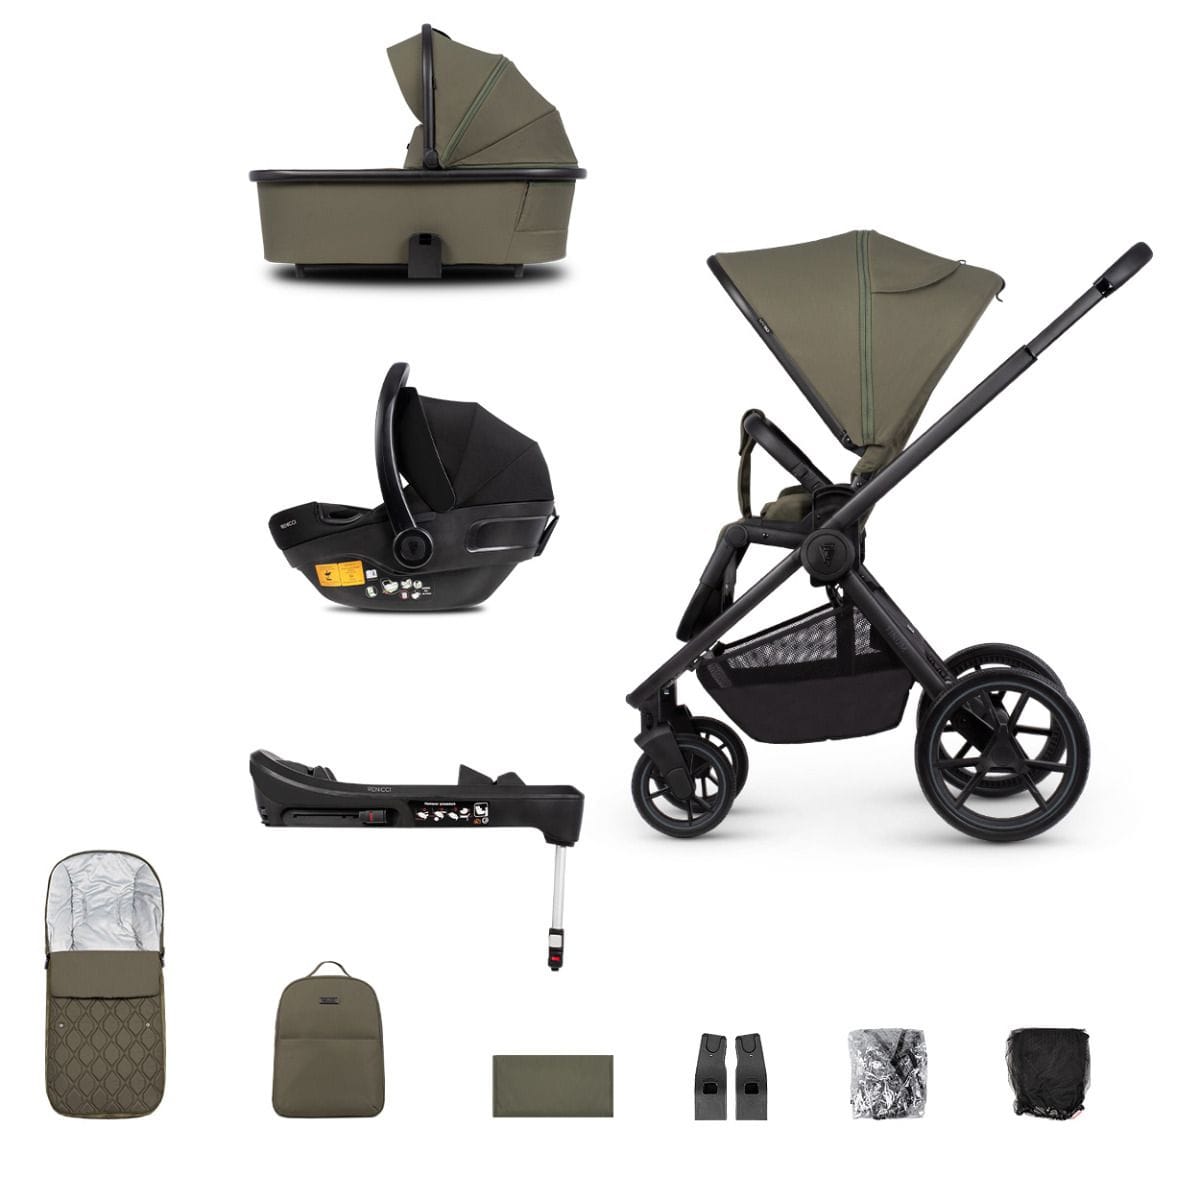 Venicci Tinum Edge 3 in 1 Travel System in Moss Travel Systems 2000610409 5905261331809